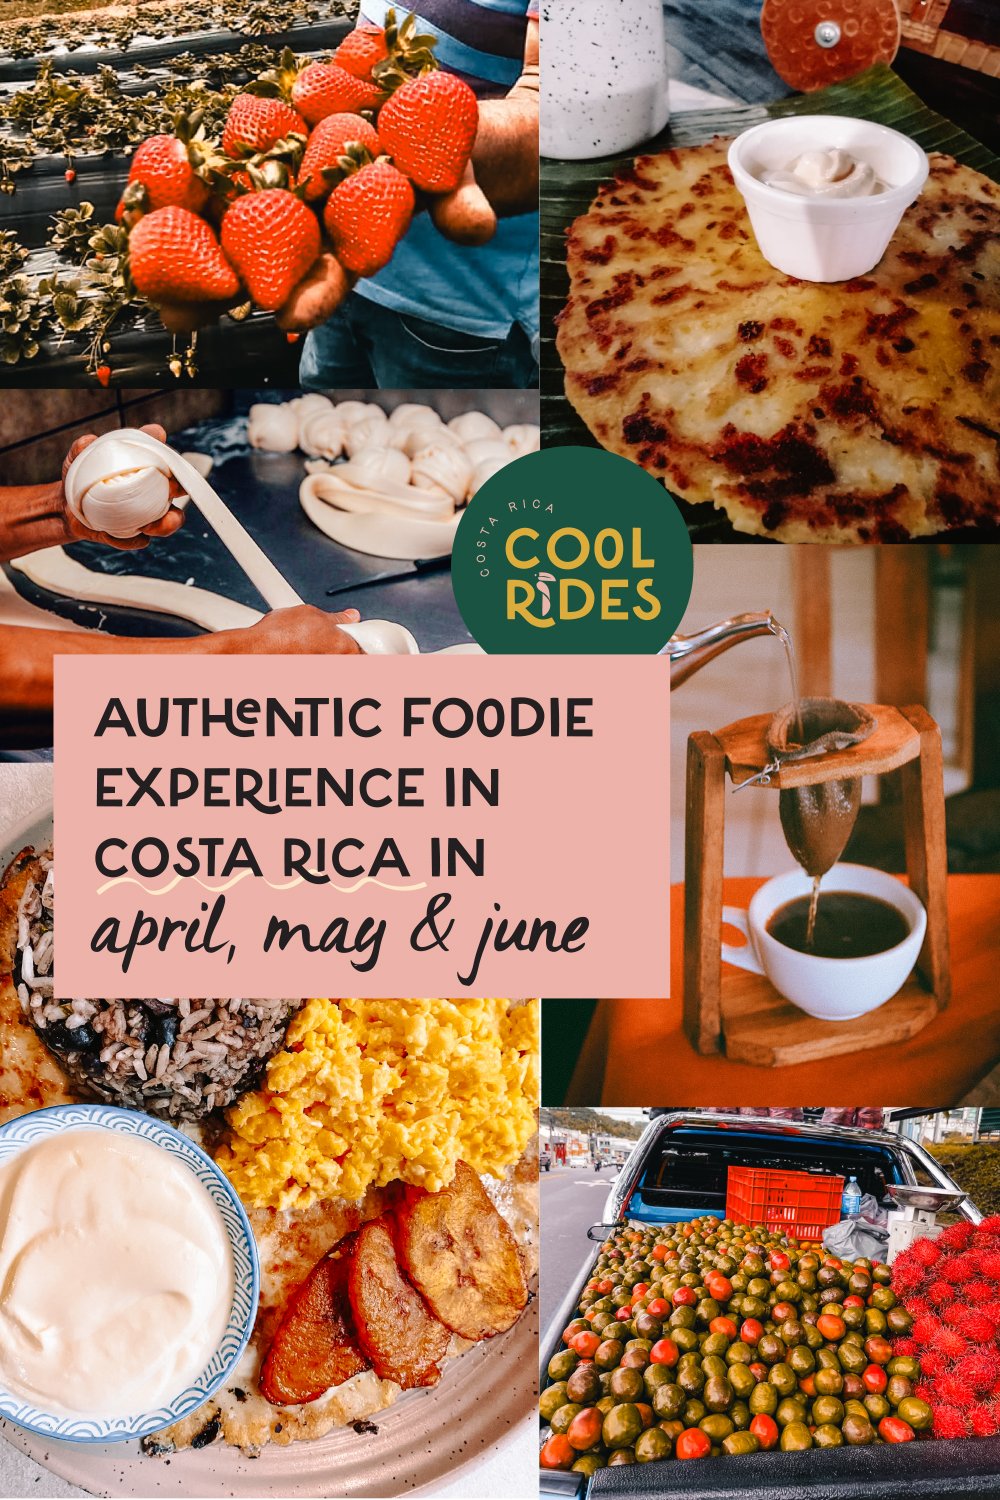 https://www.costaricacoolrides.com/tips-on-planning-a-trip-to-costa-rica/april-may-june